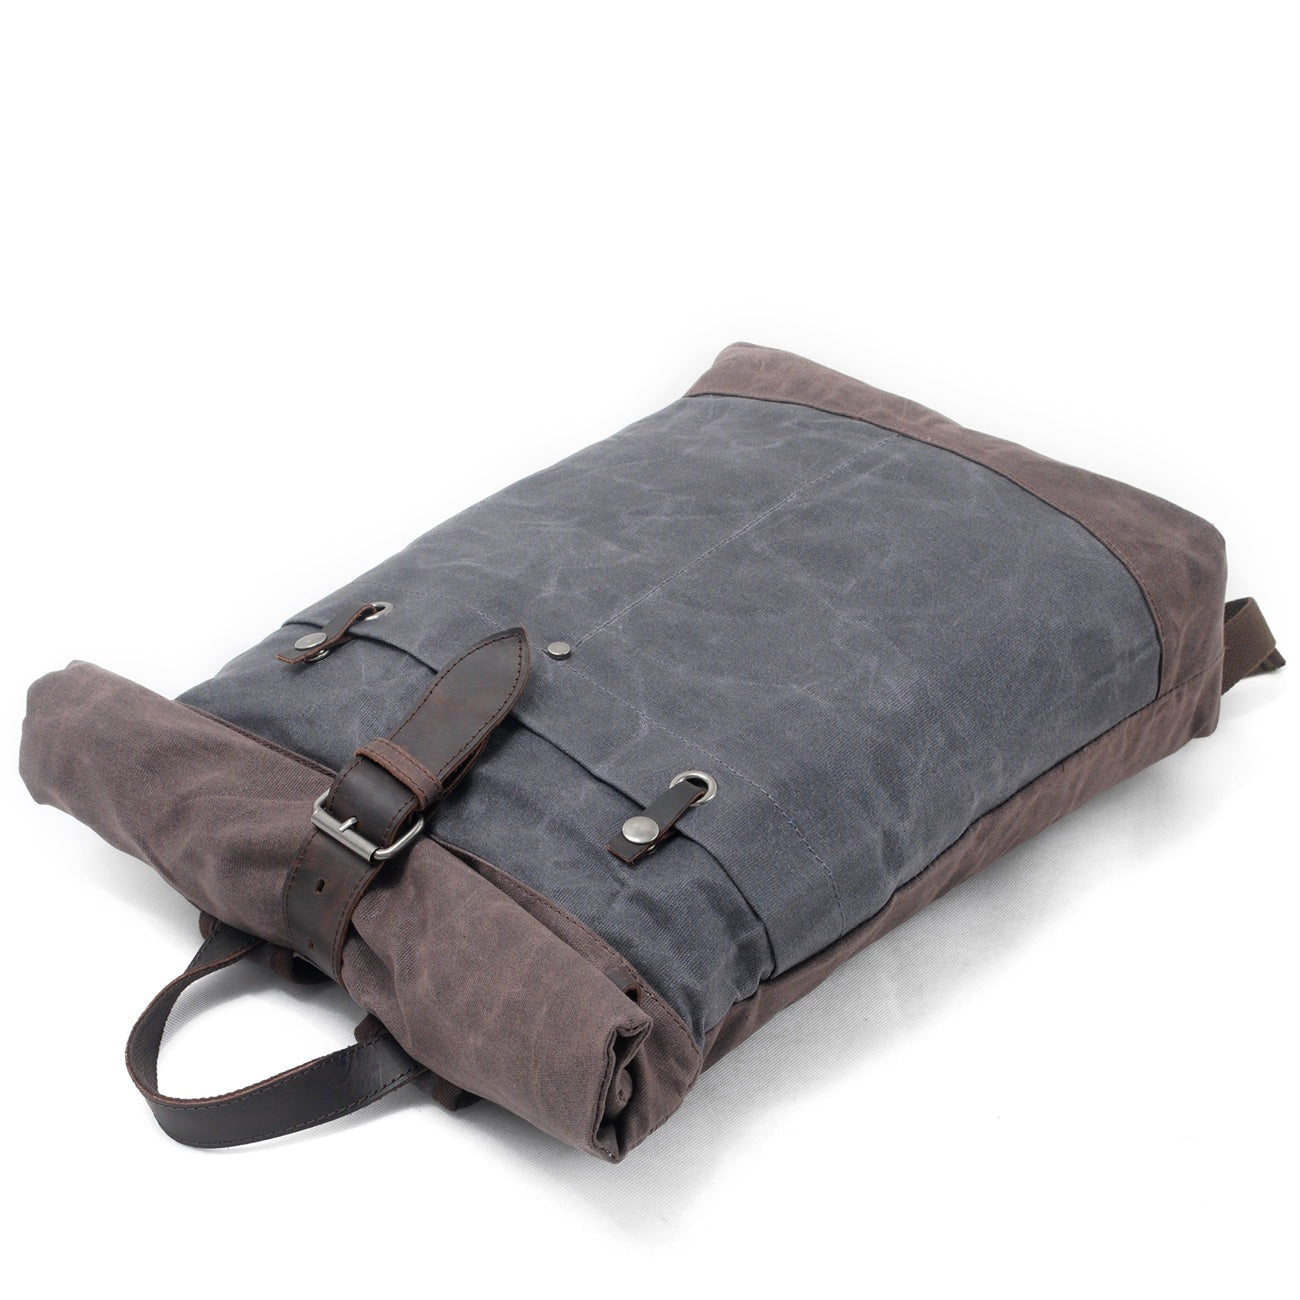 Waterproof Waxed Canvas Roll Top Backpack 18L